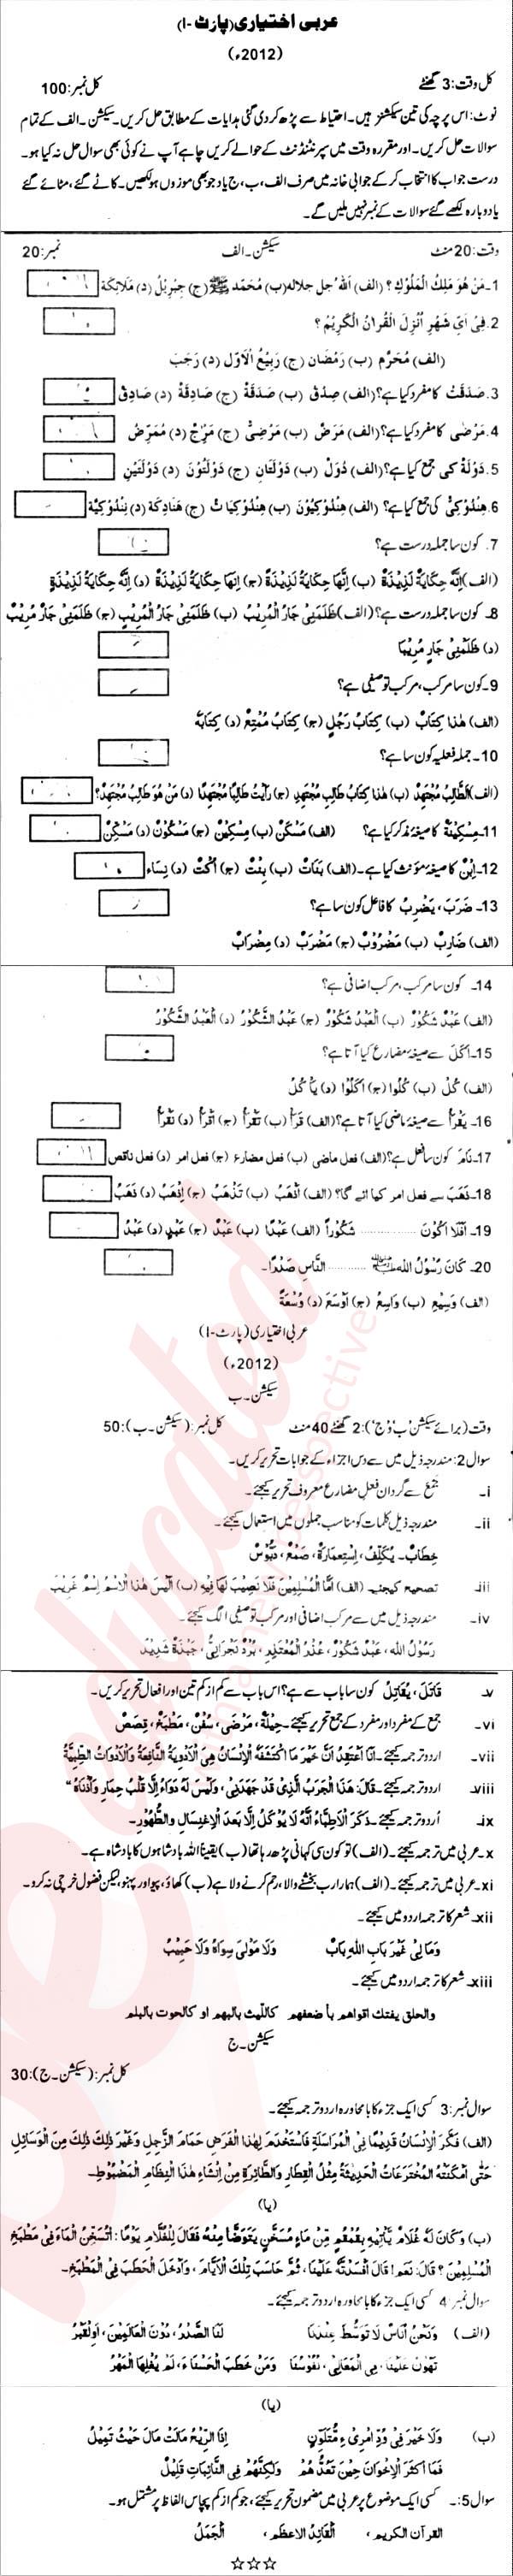 Arabic FA Part 1 Past Paper Group 1 BISE Abbottabad 2012